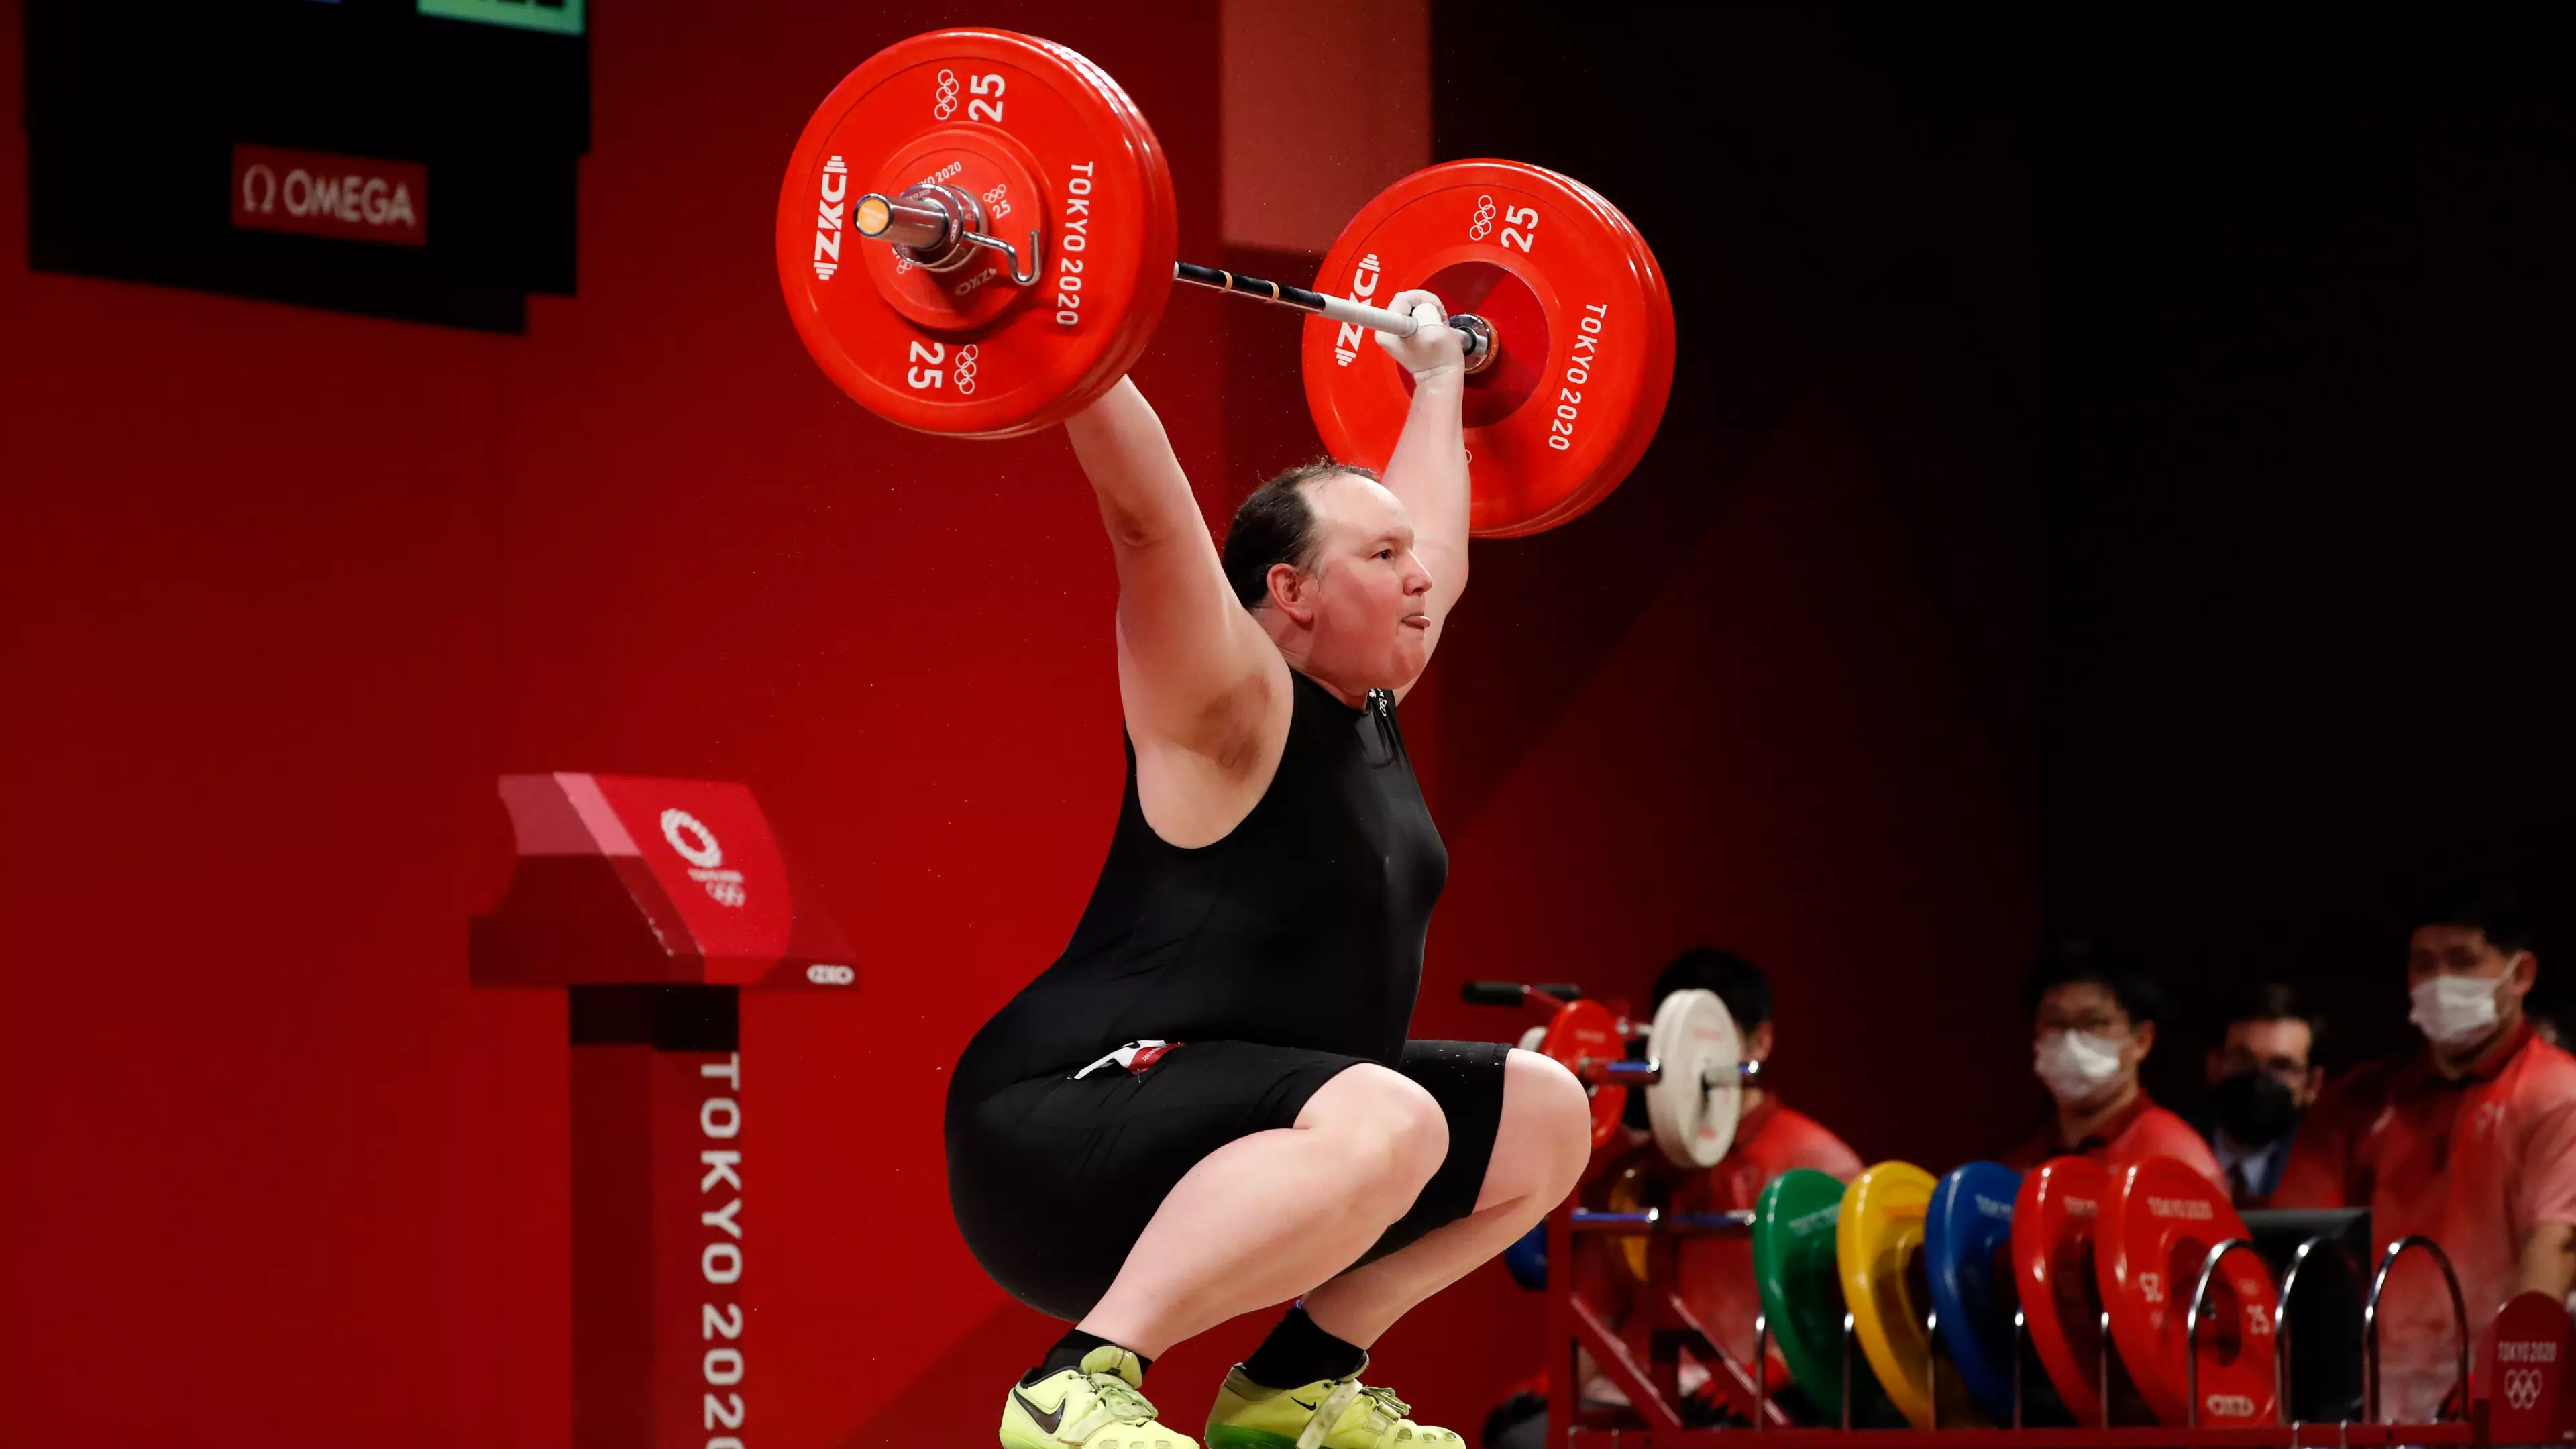 Transgender Weightlifter Laurel Hubbard Announces Plans To Retire After Olympics Appearance